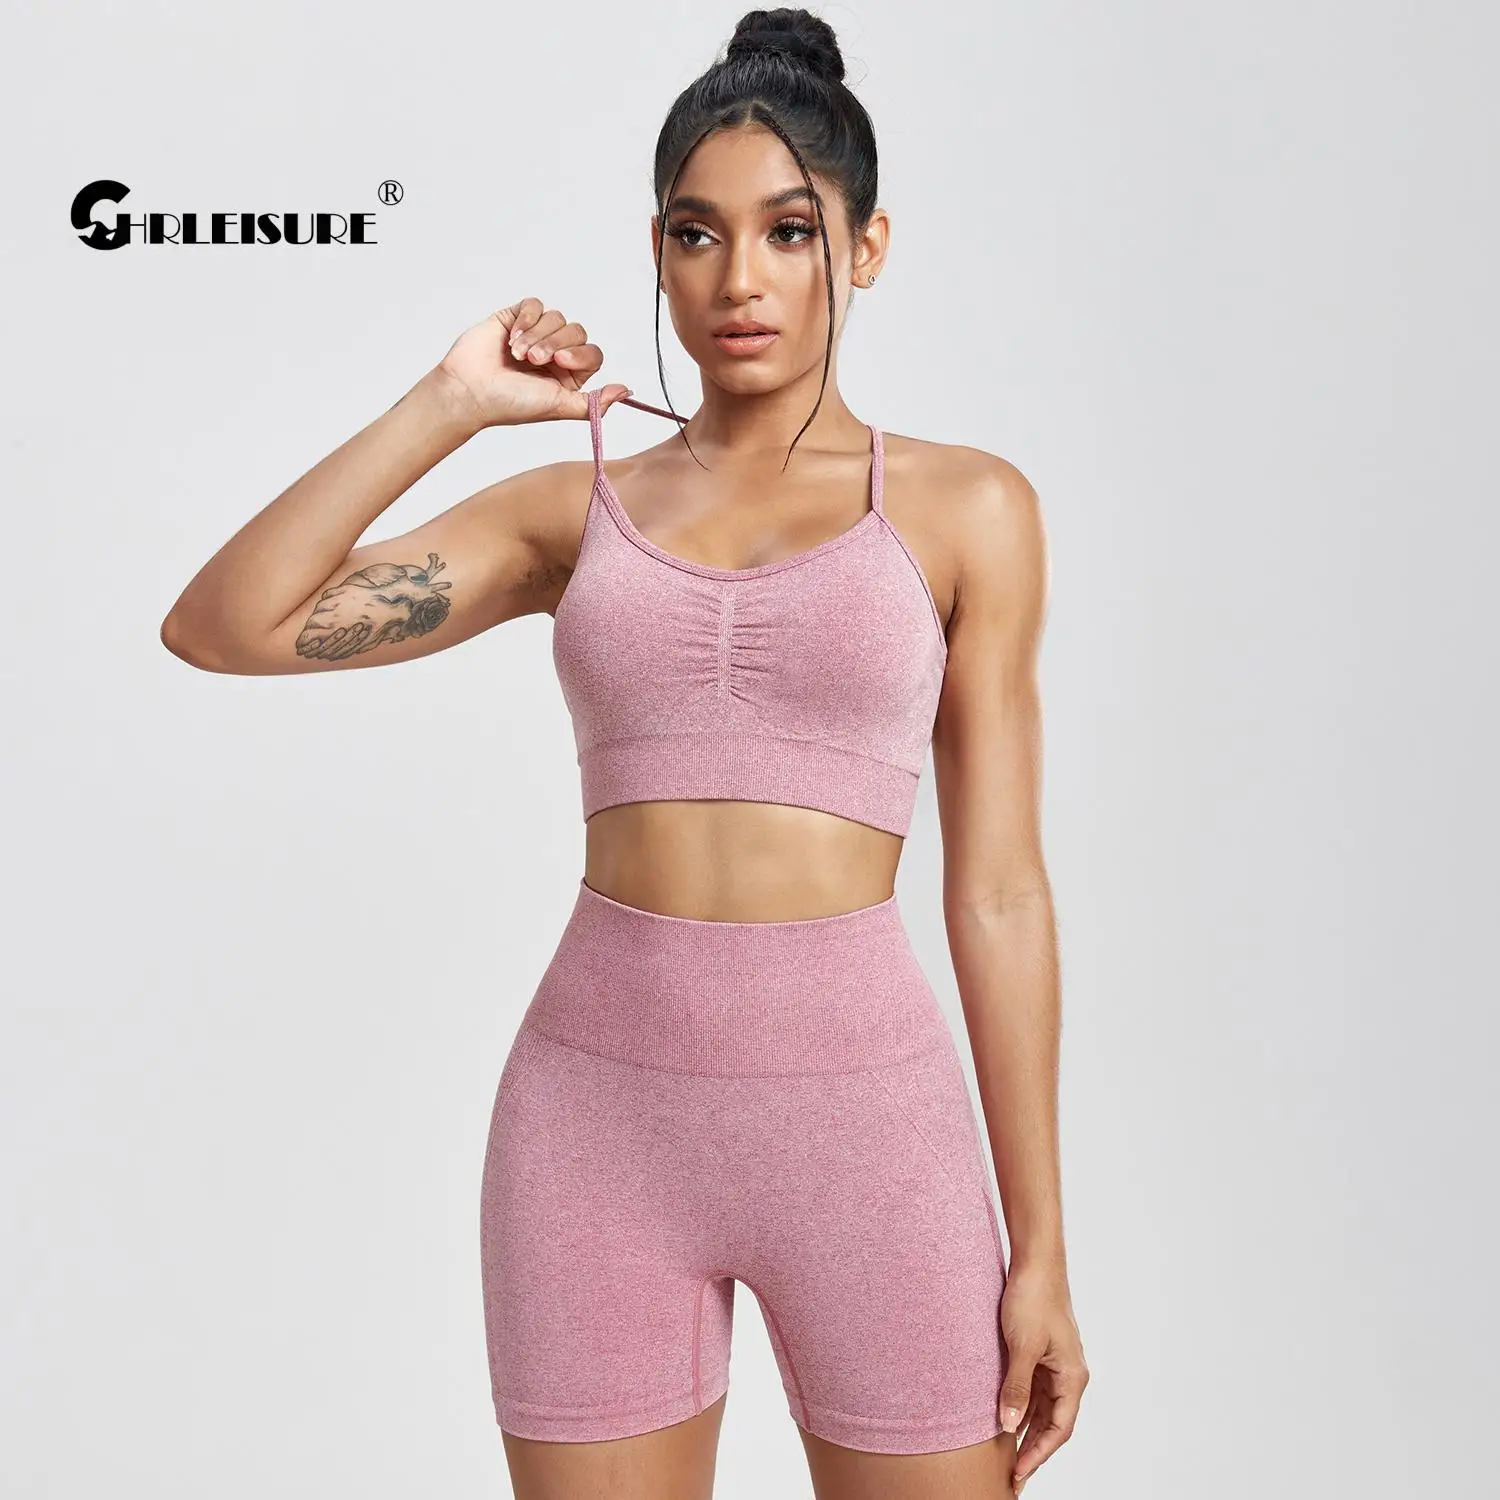 CHRLEISURE Seamless Sports Set Women's 2PCS Yoga Suit Fitness Bra with Cycling Shorts Gym Elastic Workout Outfit Activewear